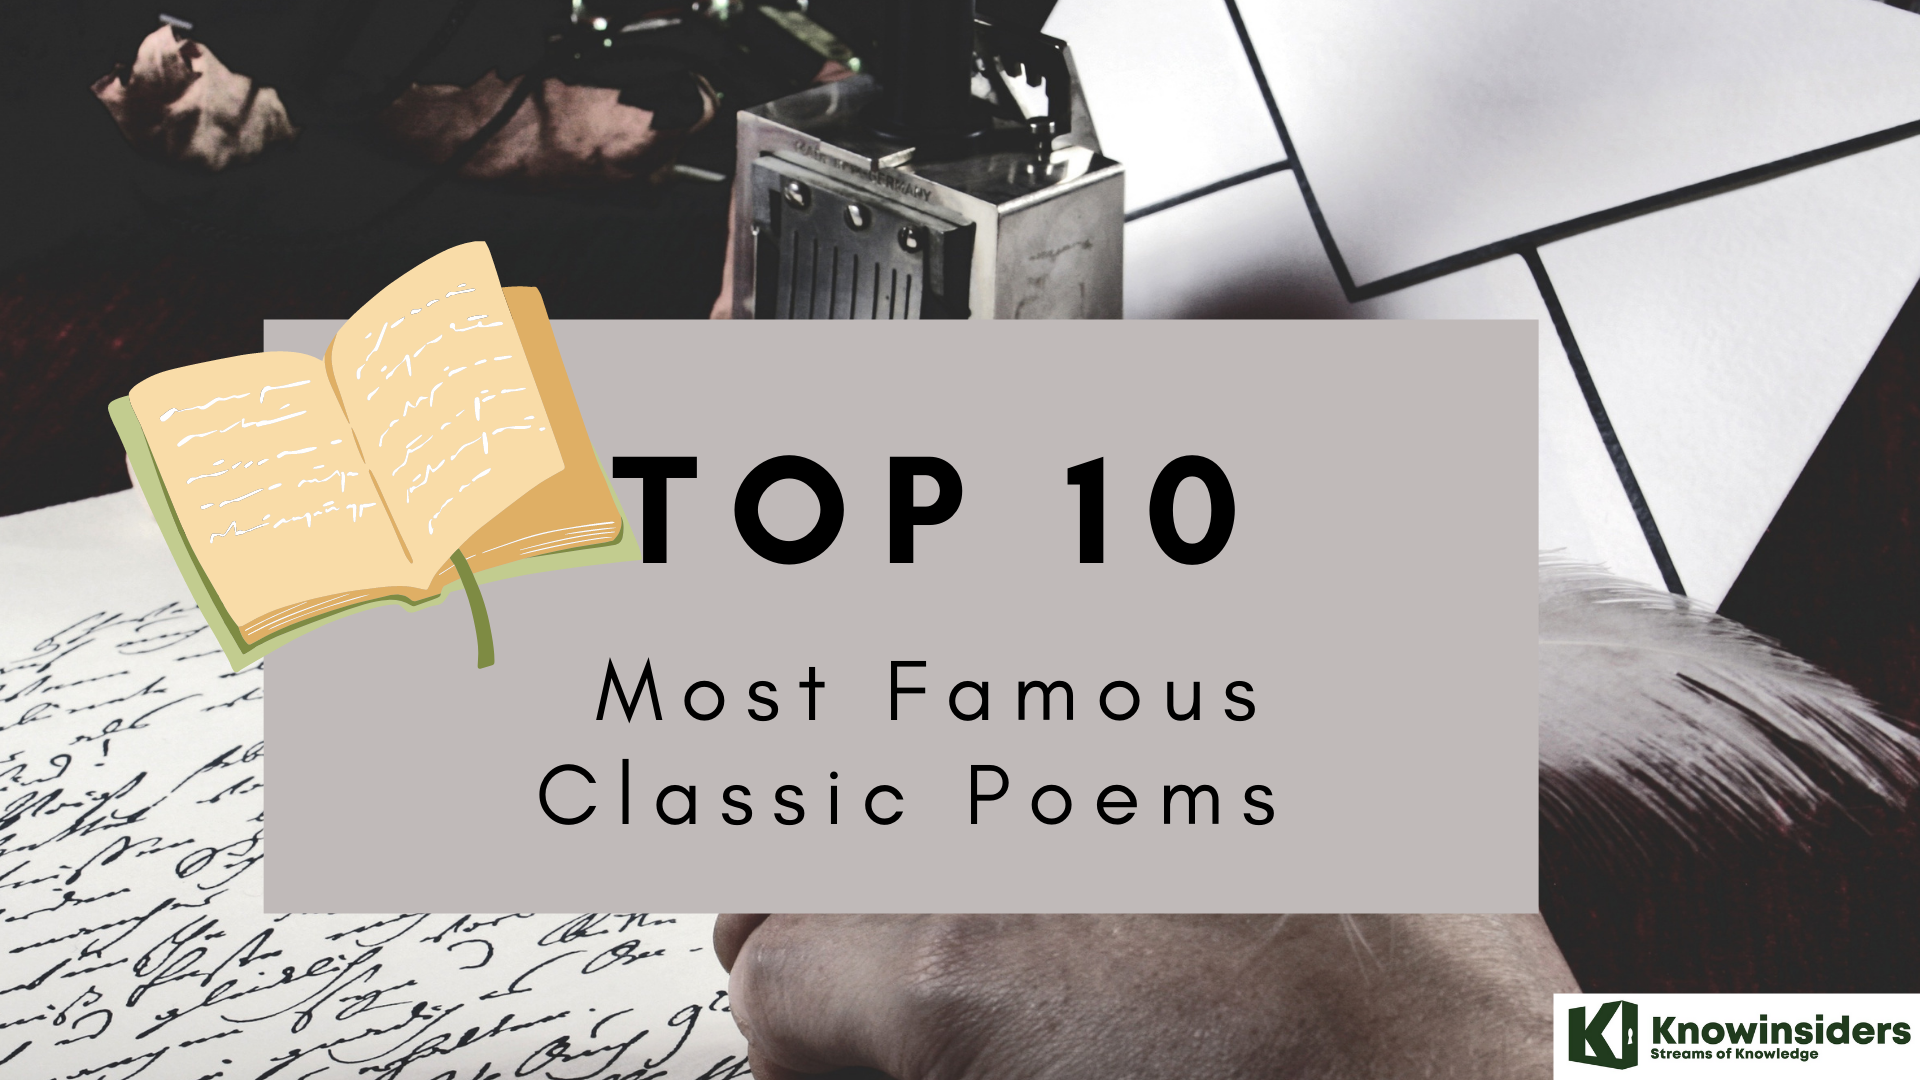 What Are The Best and Most Famous Classic Poems?